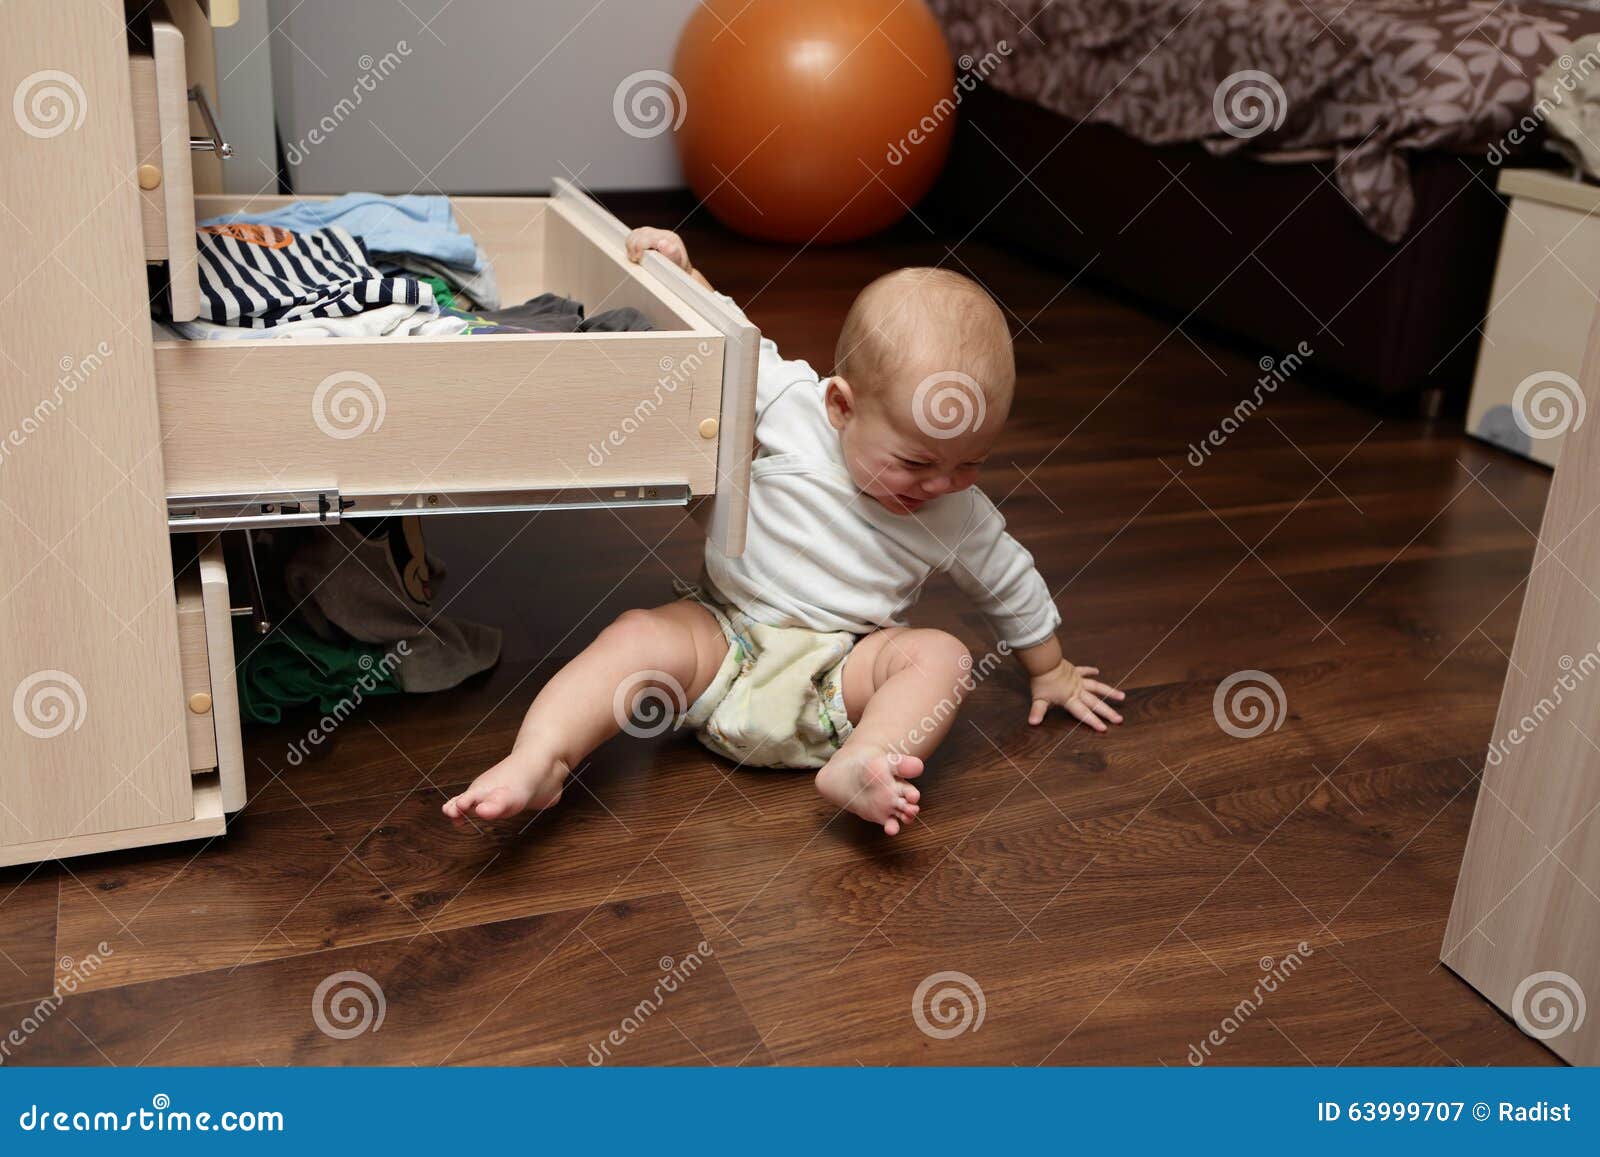 Crying baby on a floor stock image. Image of indoor, baby 63999707